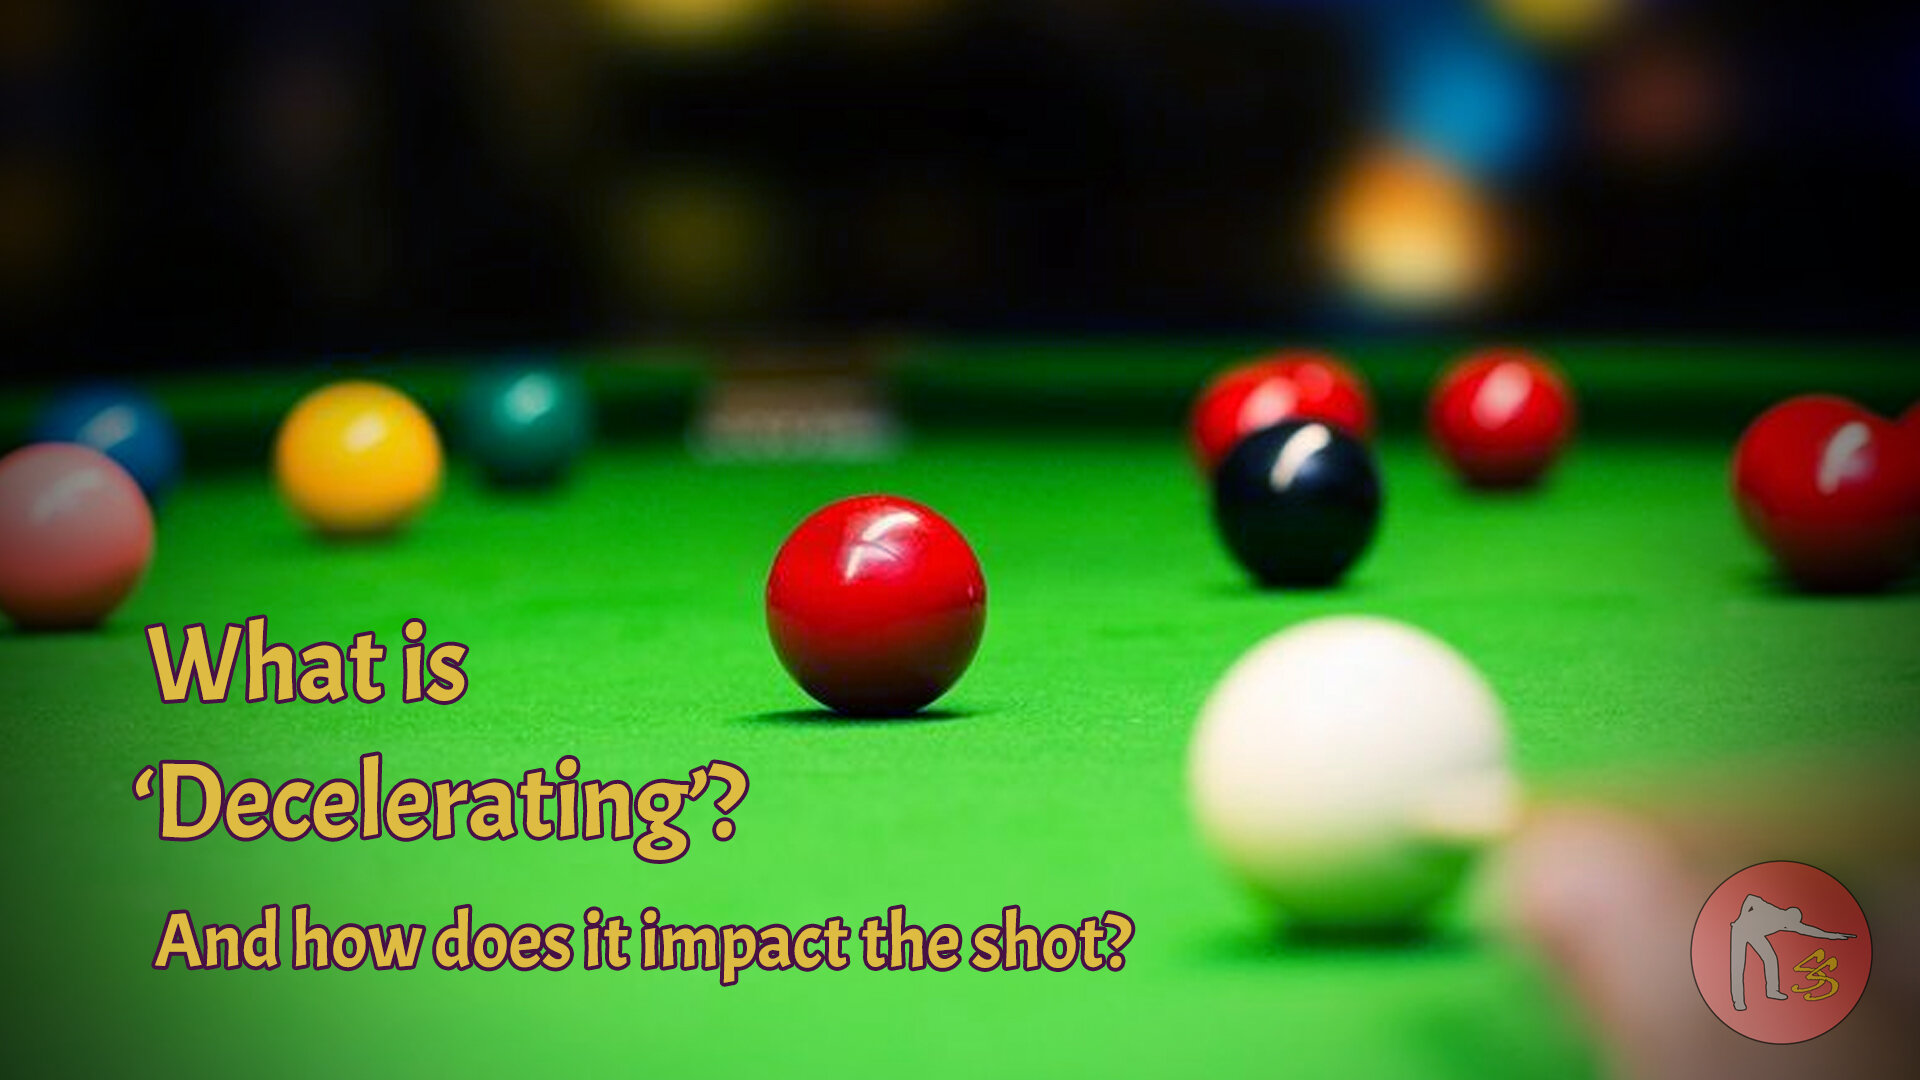 What is Decelerating in Snooker? — Snooker Shorts